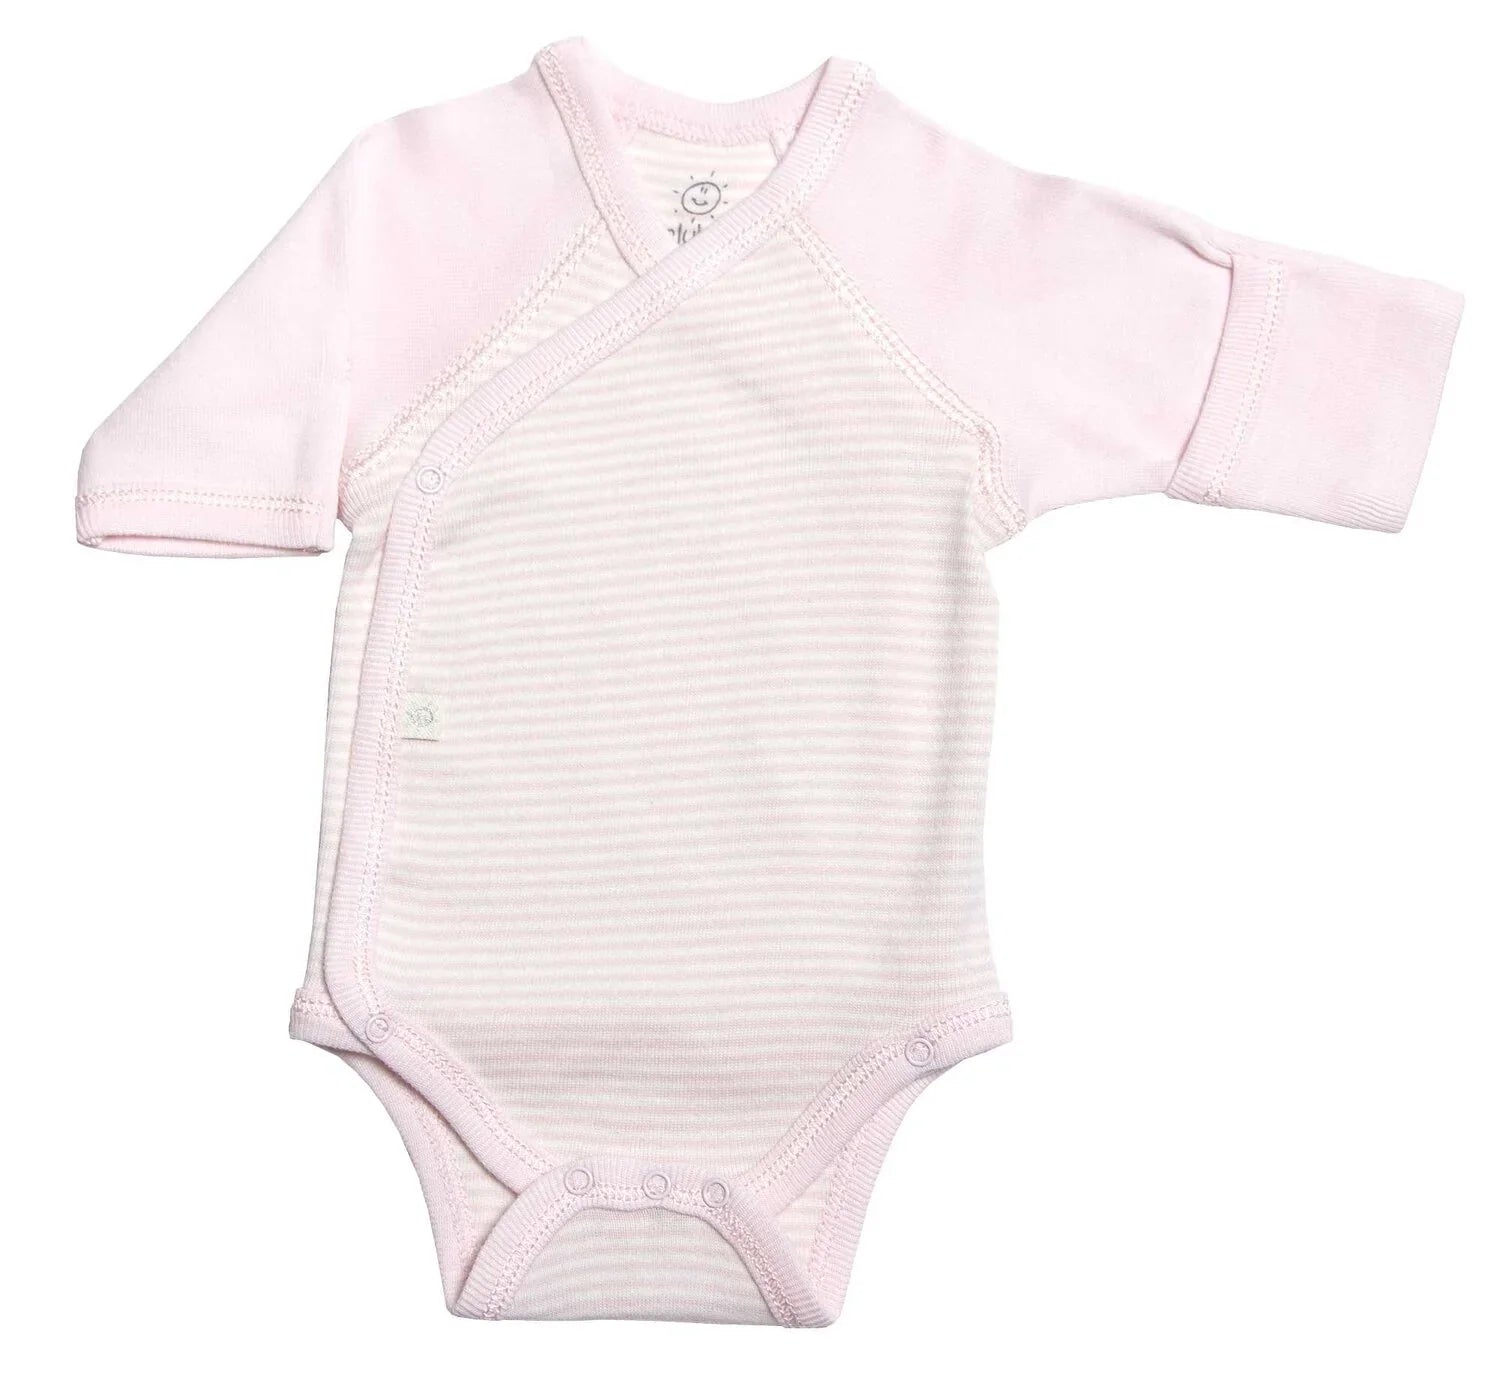 Get trendy with Body Rose Préma Bio - EARLYBIRDS - Vêtements bébé available at BABY PREMA. Grab yours for €11.99 today!